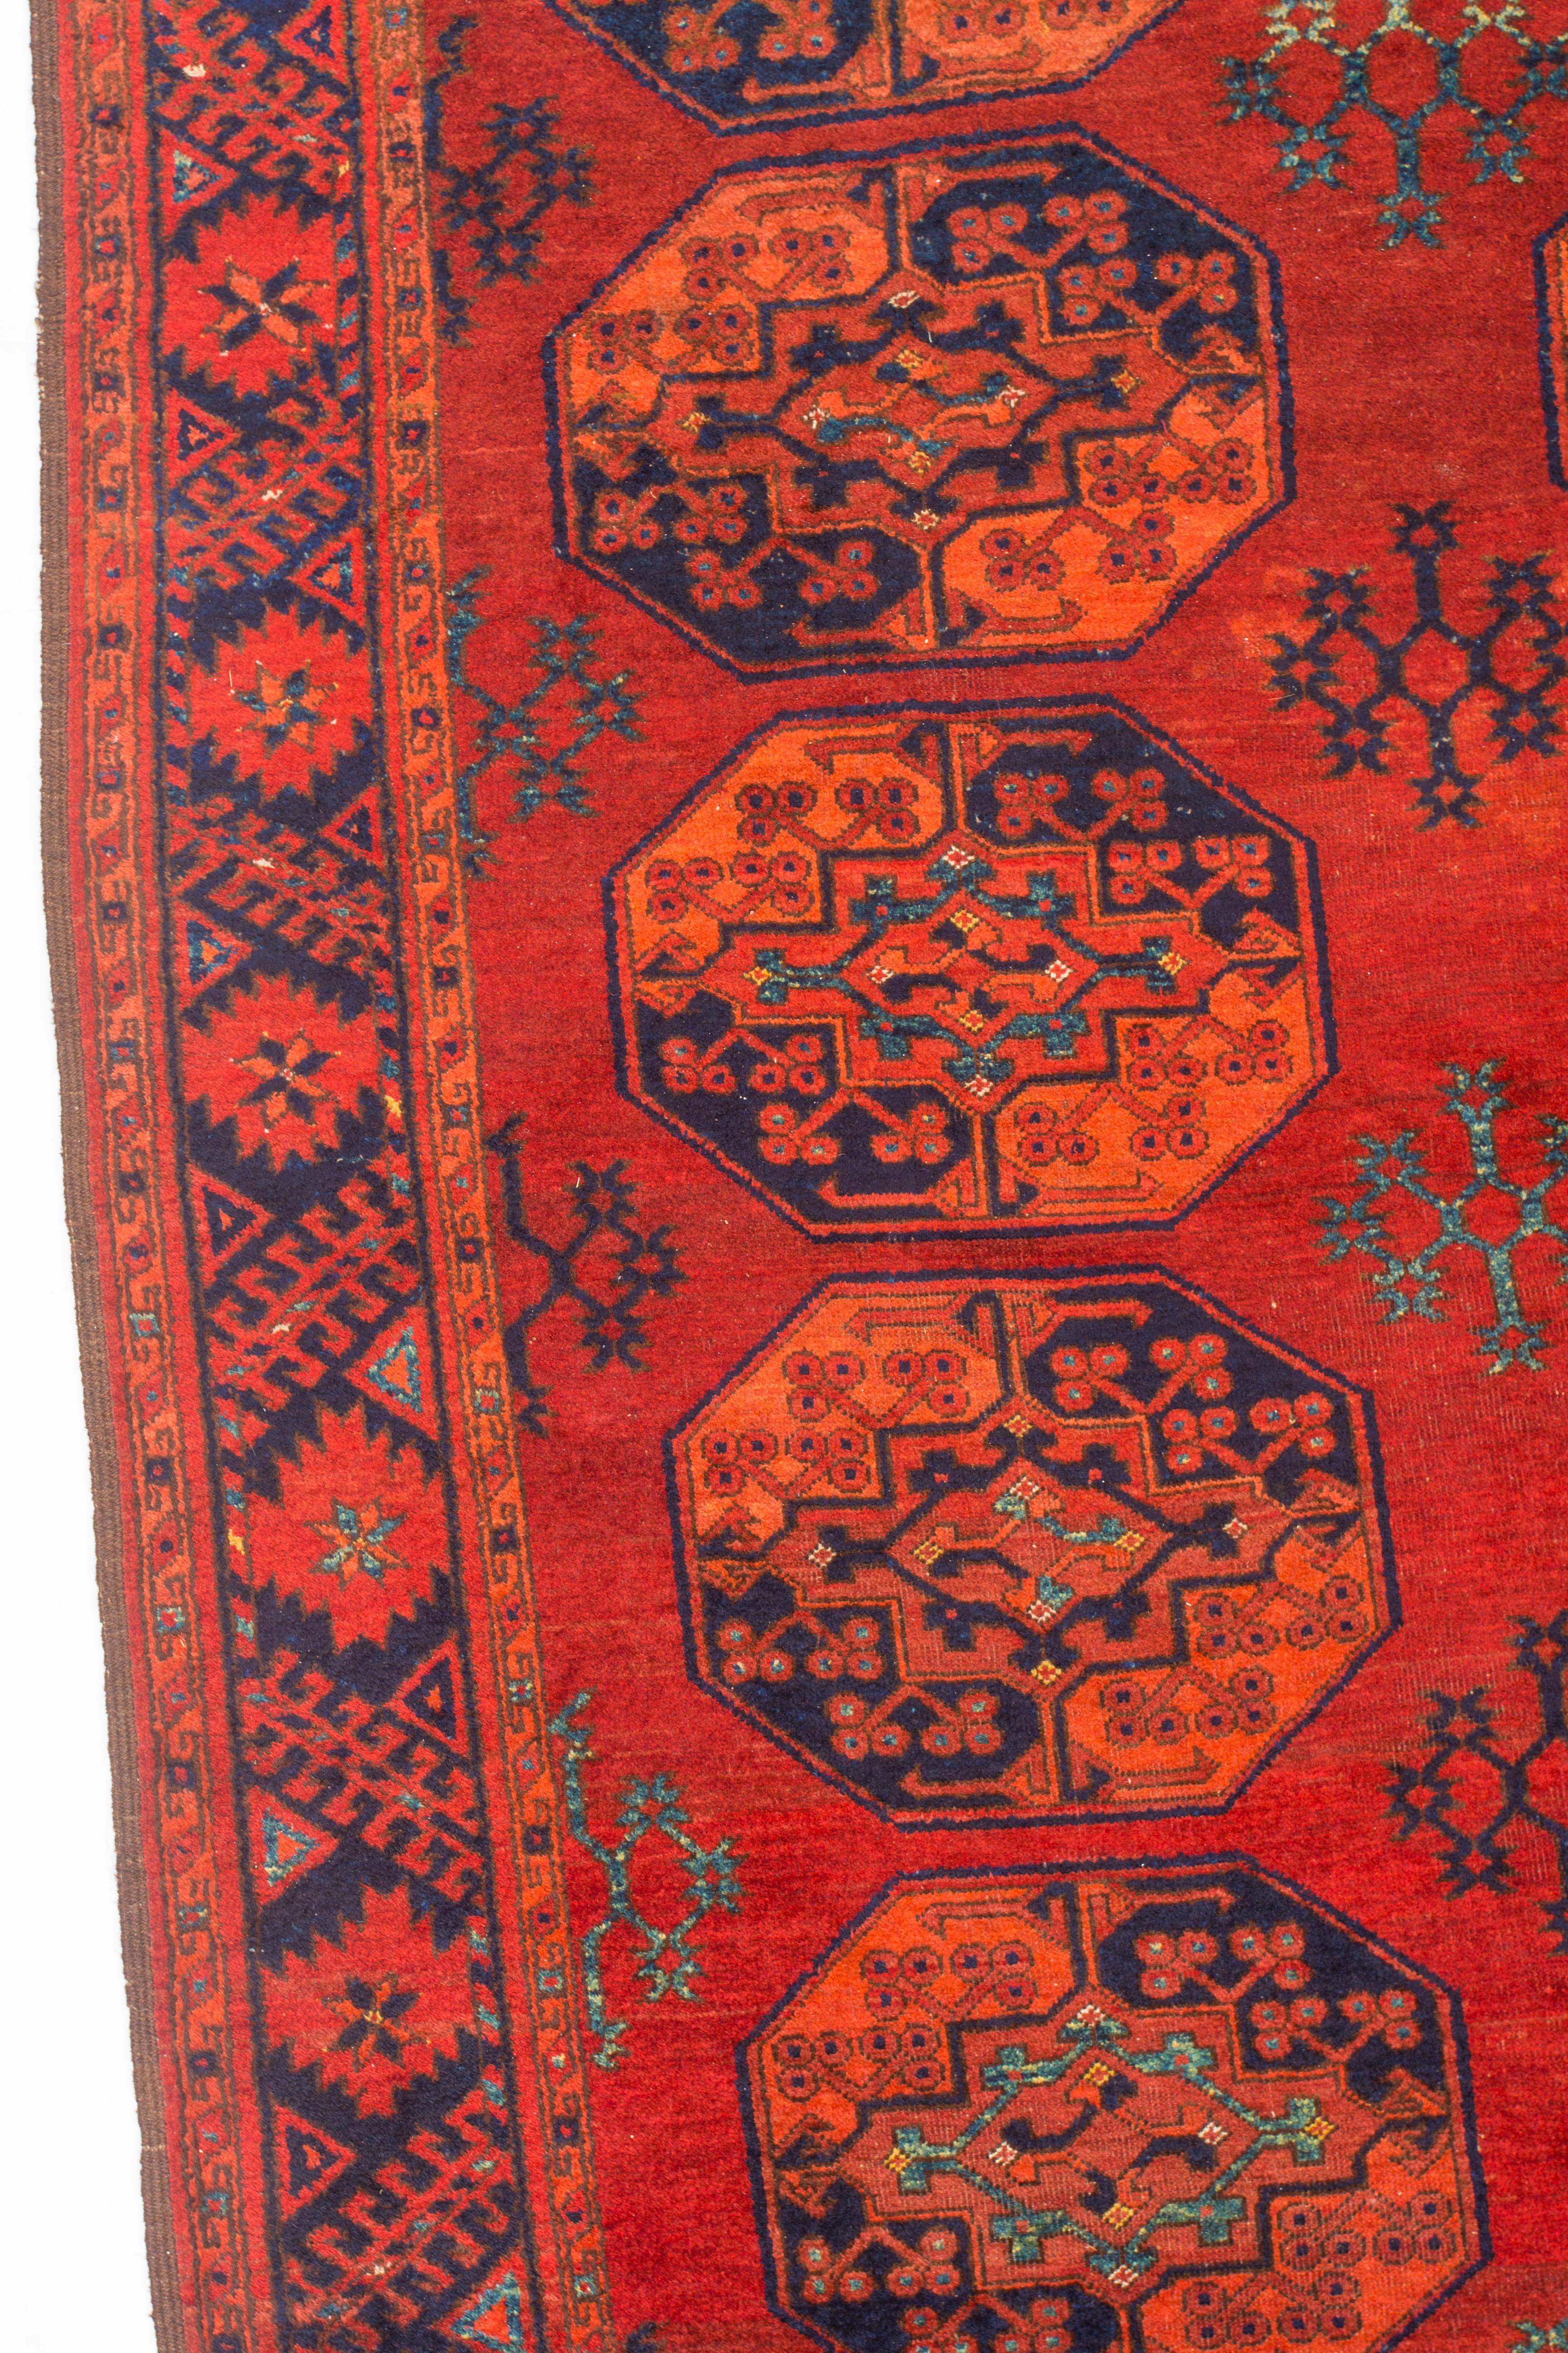 Woven Extremely Rare Antique Large Tekke Turkomen For Sale